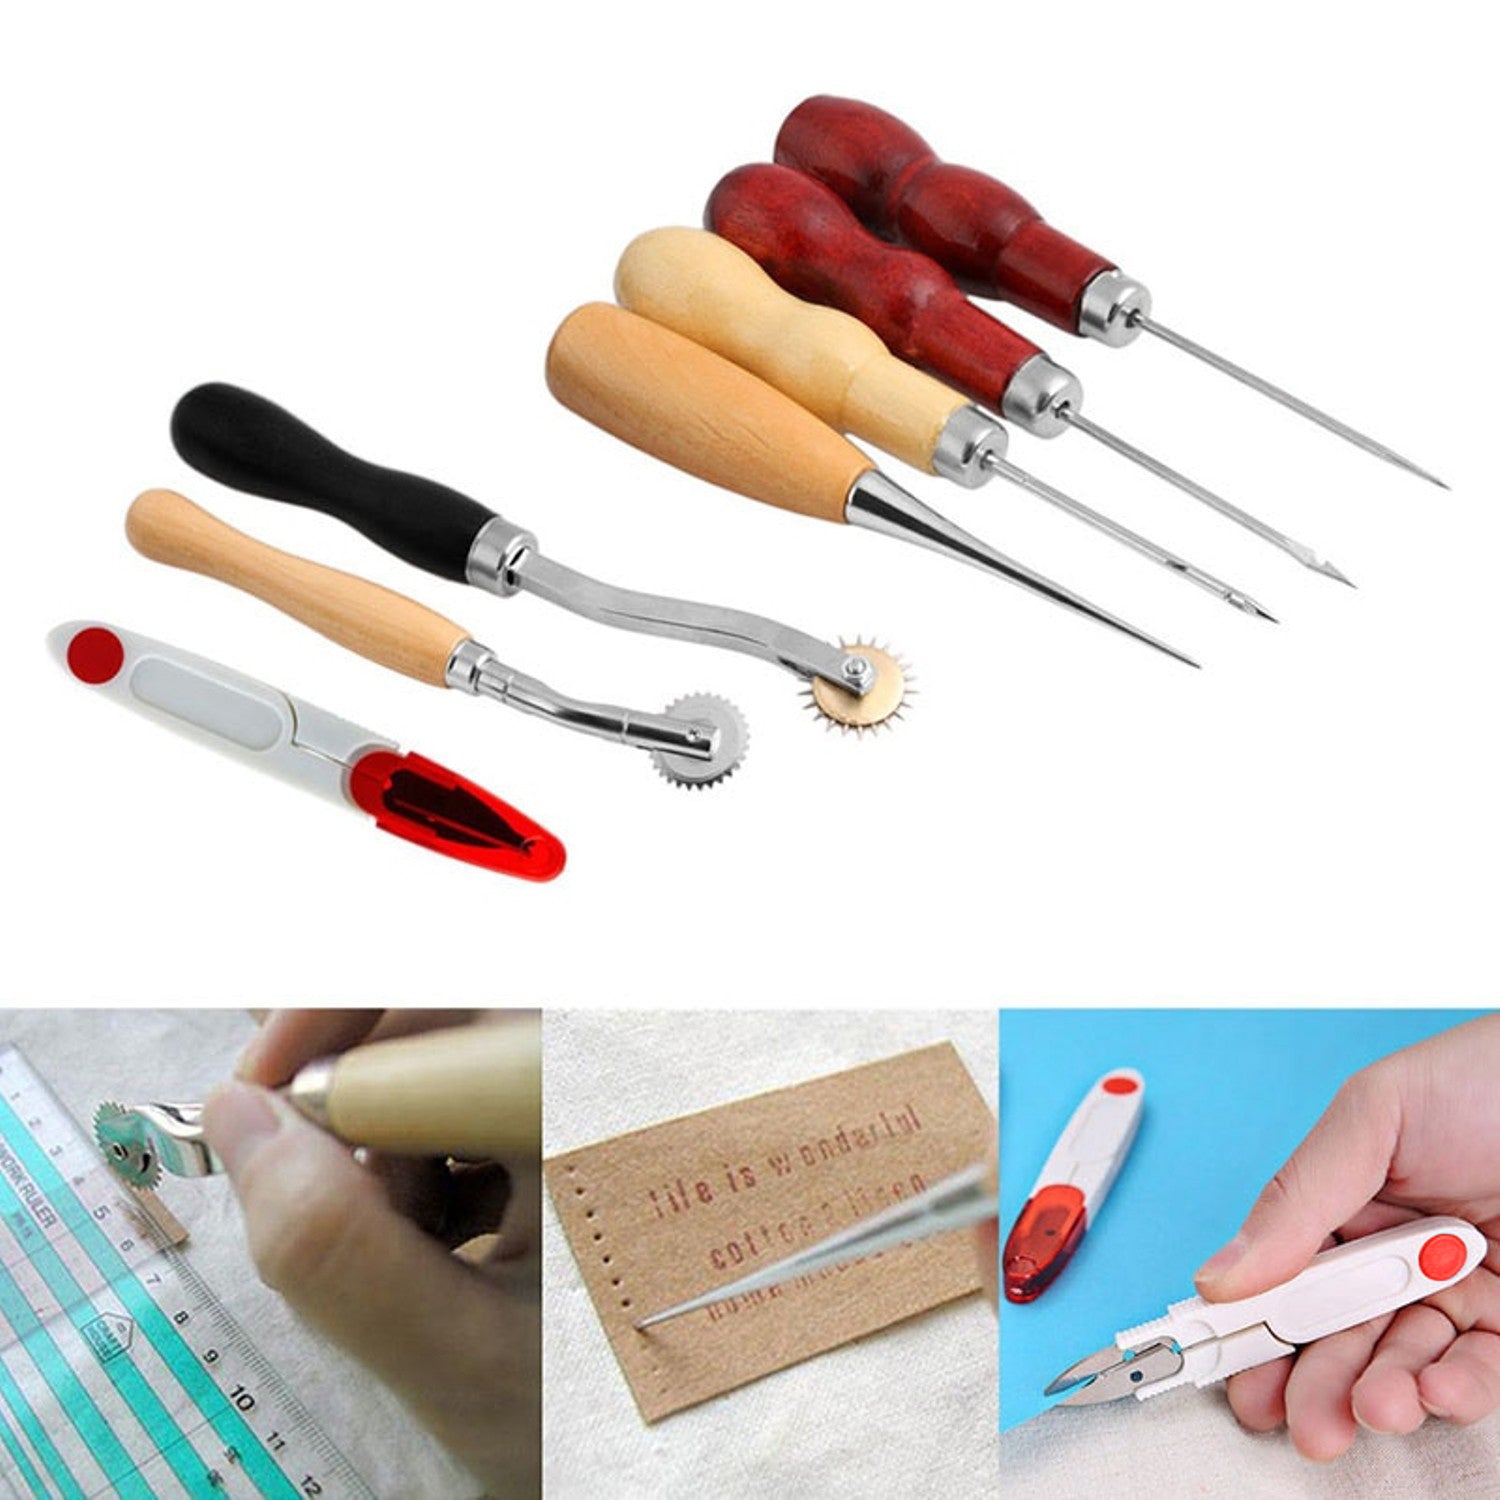 Our sewing tools — SEWPLY